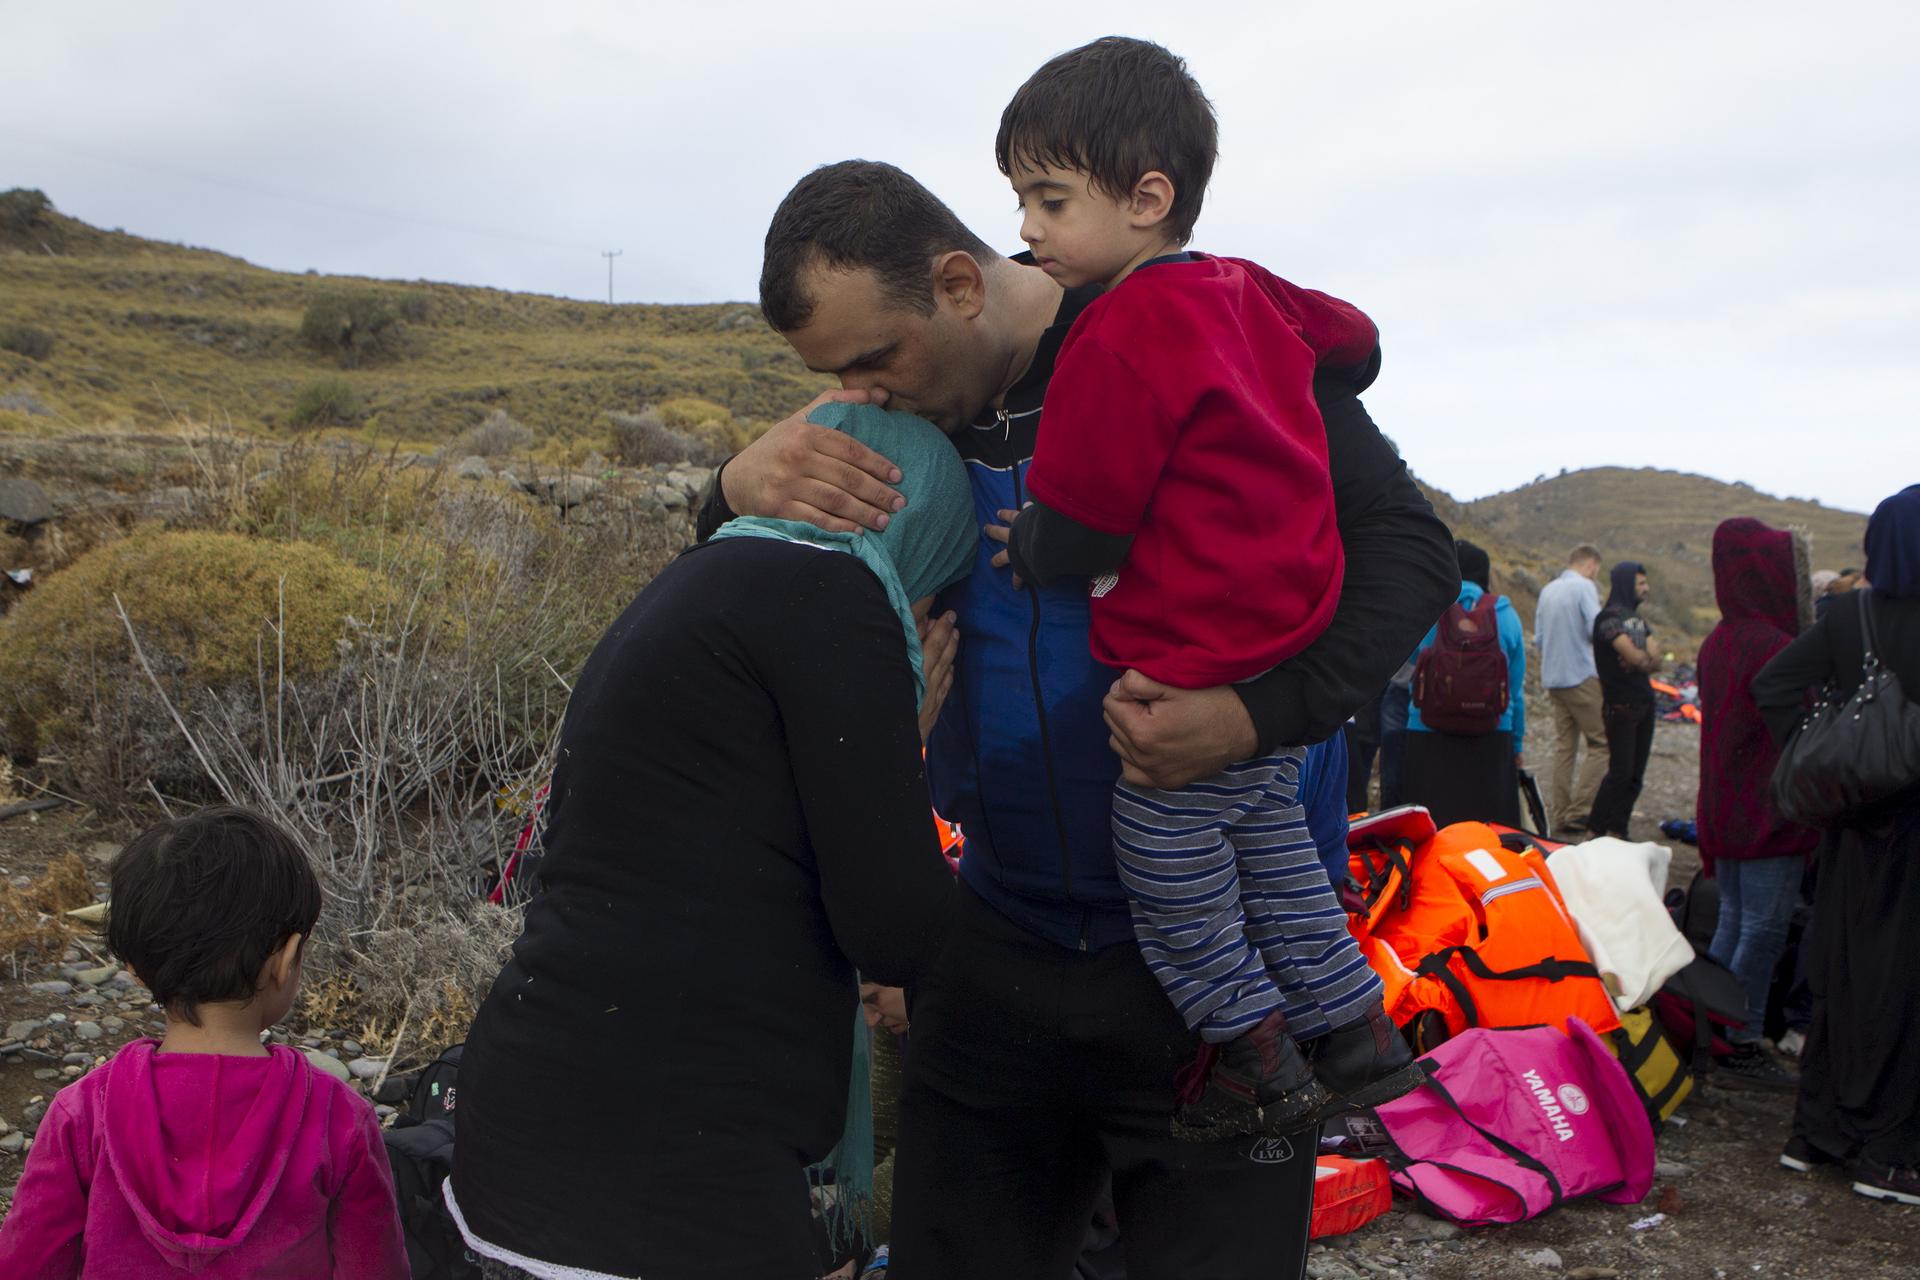 Syrian family embrace after making journey to Greece